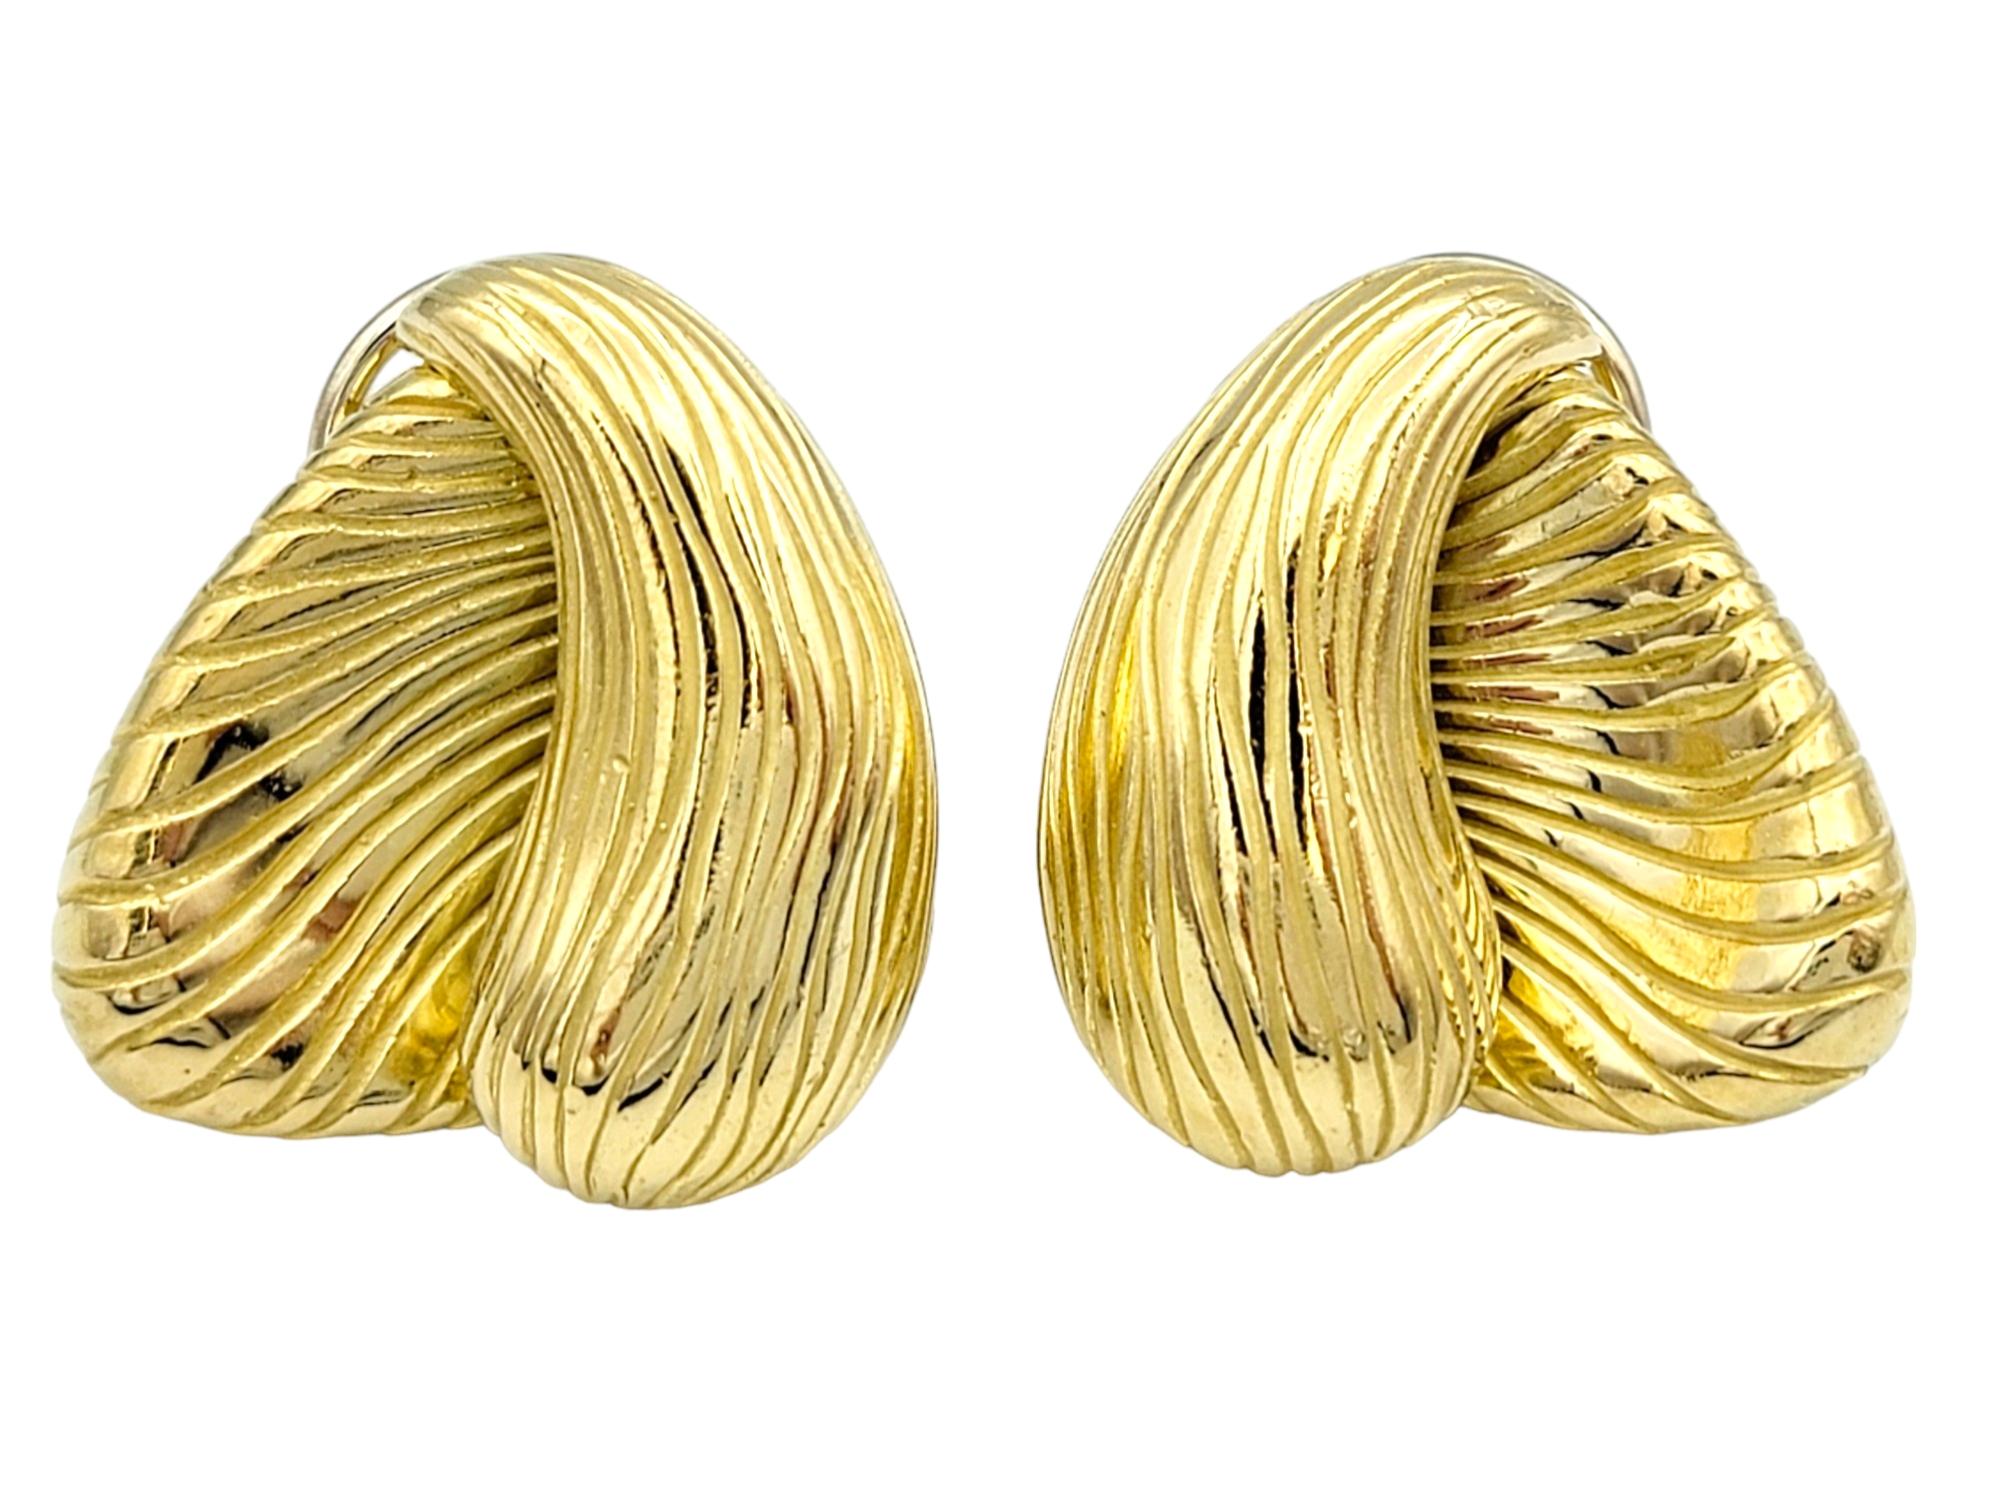 This vintage pair of Angela Cummings earrings crafted in 18 karat yellow gold exemplify her signature style, characterized by innovative designs and meticulous craftsmanship. The earrings feature a distinctive ridged and asymmetrical design. Each